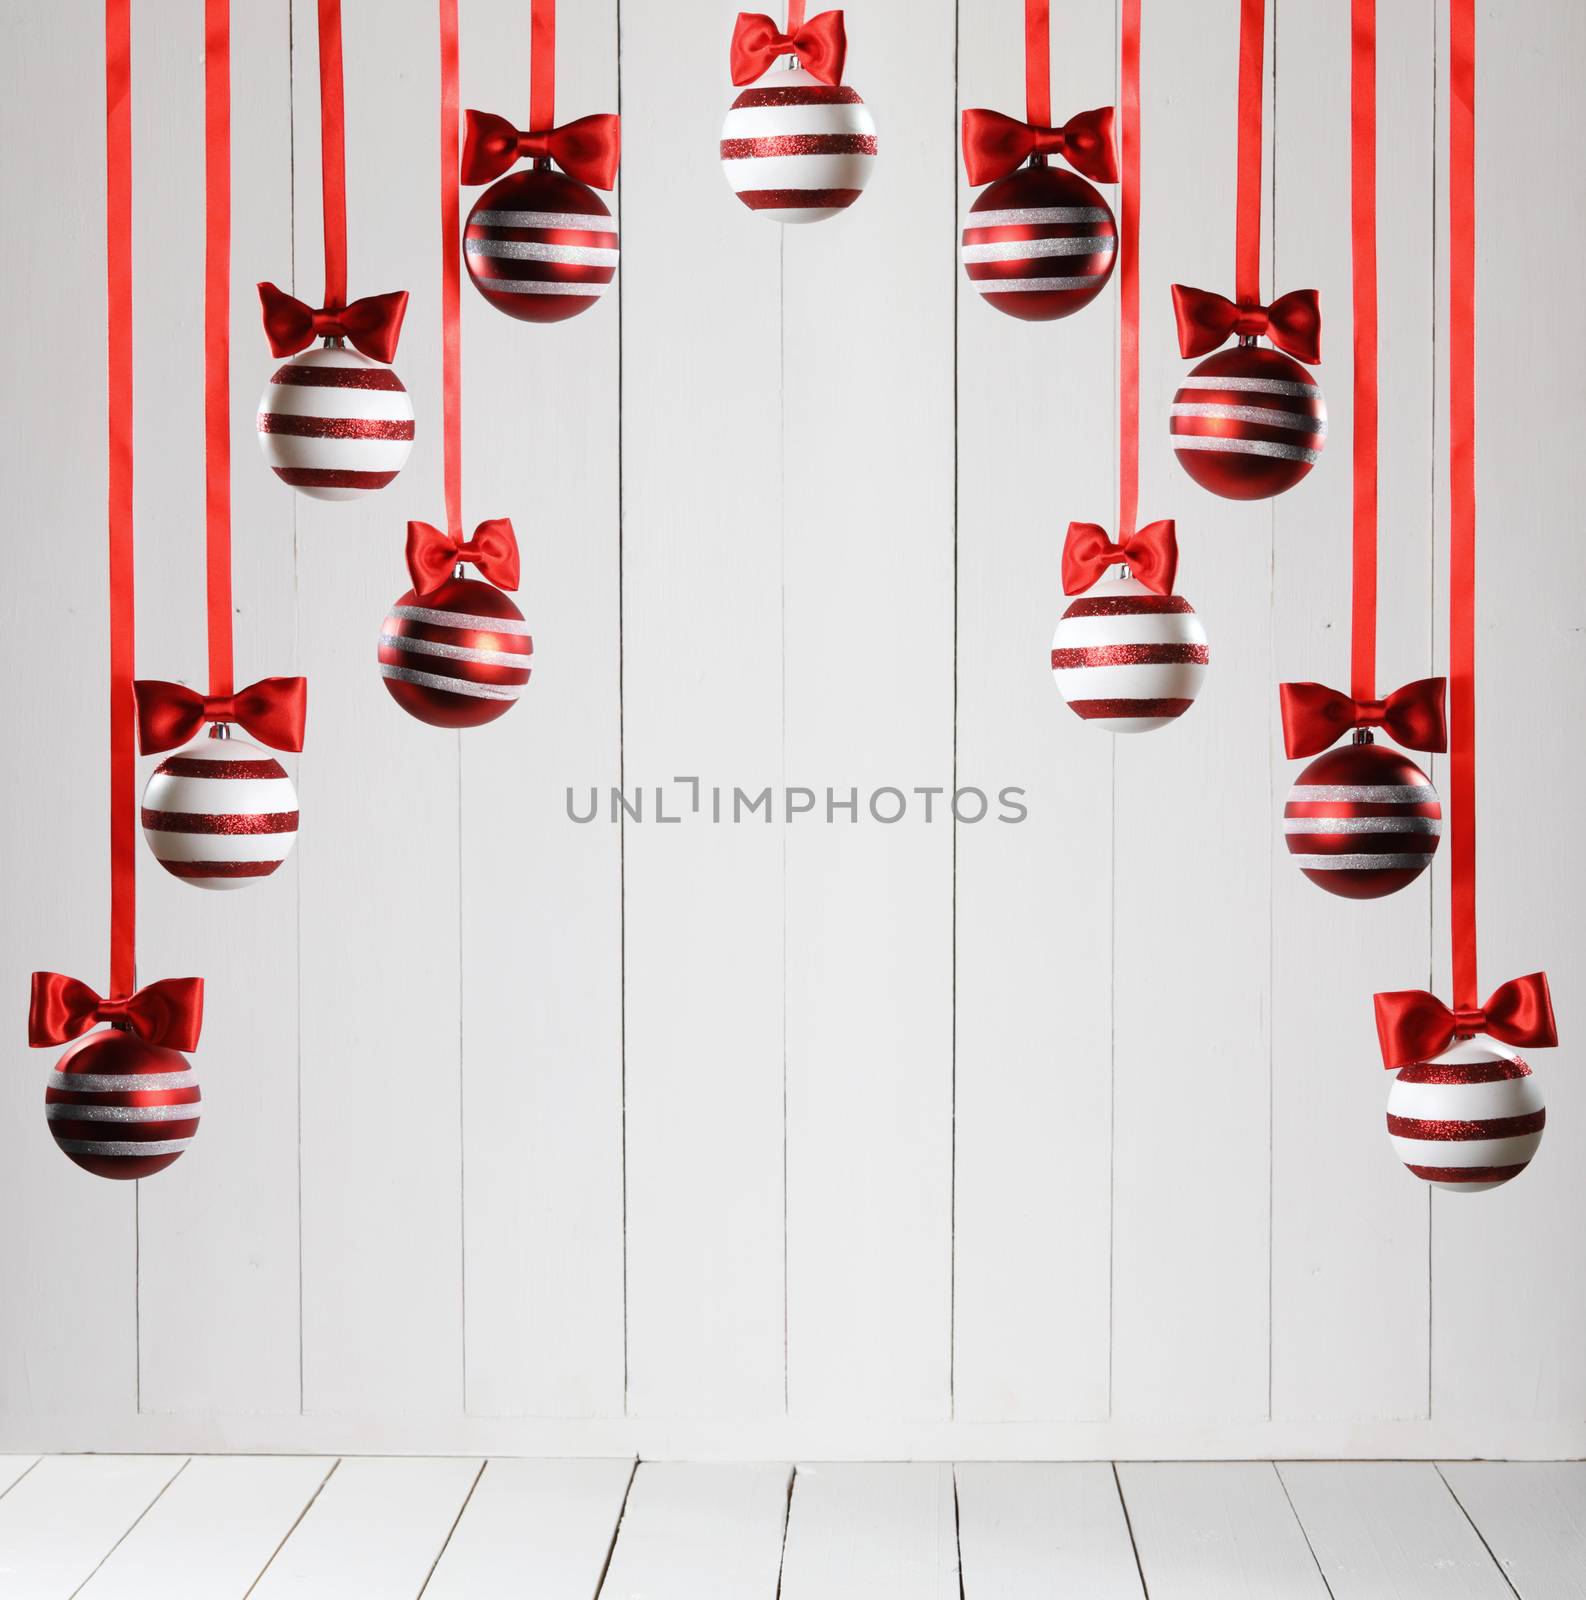 Red Christmas balls hanging on red ribbons on white wooden background